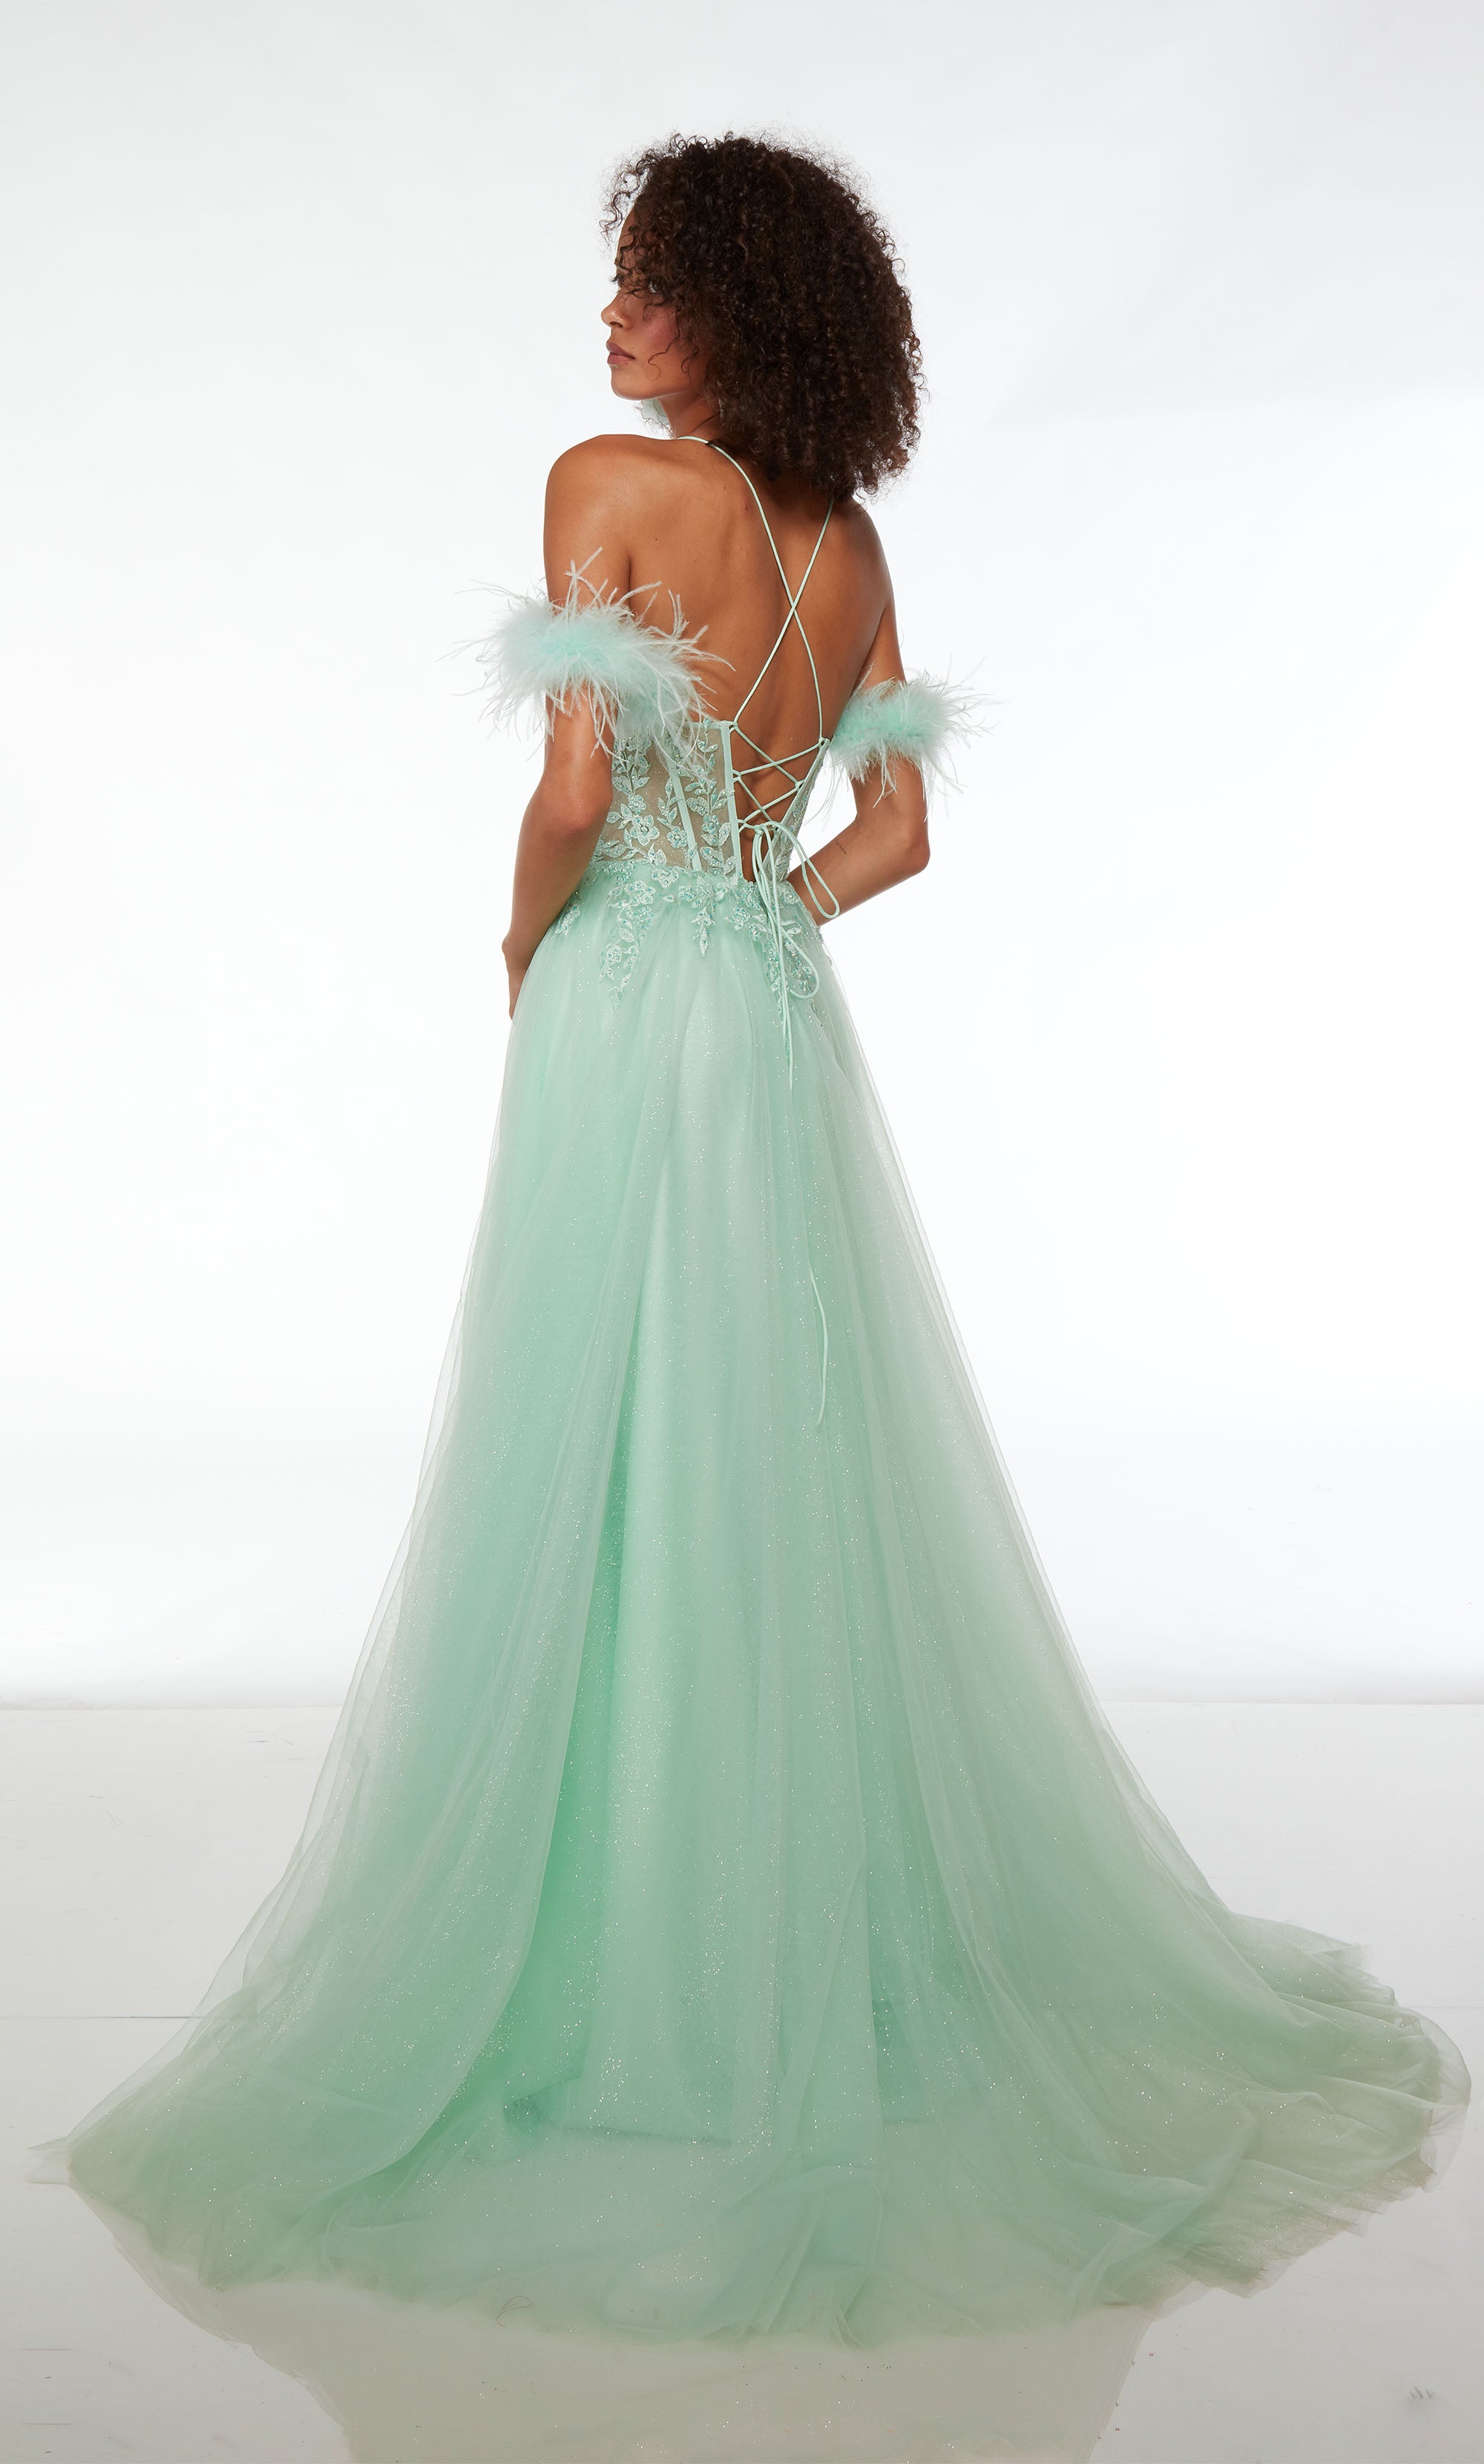 Green prom dress: sheer lace corset, high slit, detachable feather straps, A-line glitter skirt, crisscross lace-up back, and an train for an stylish look.